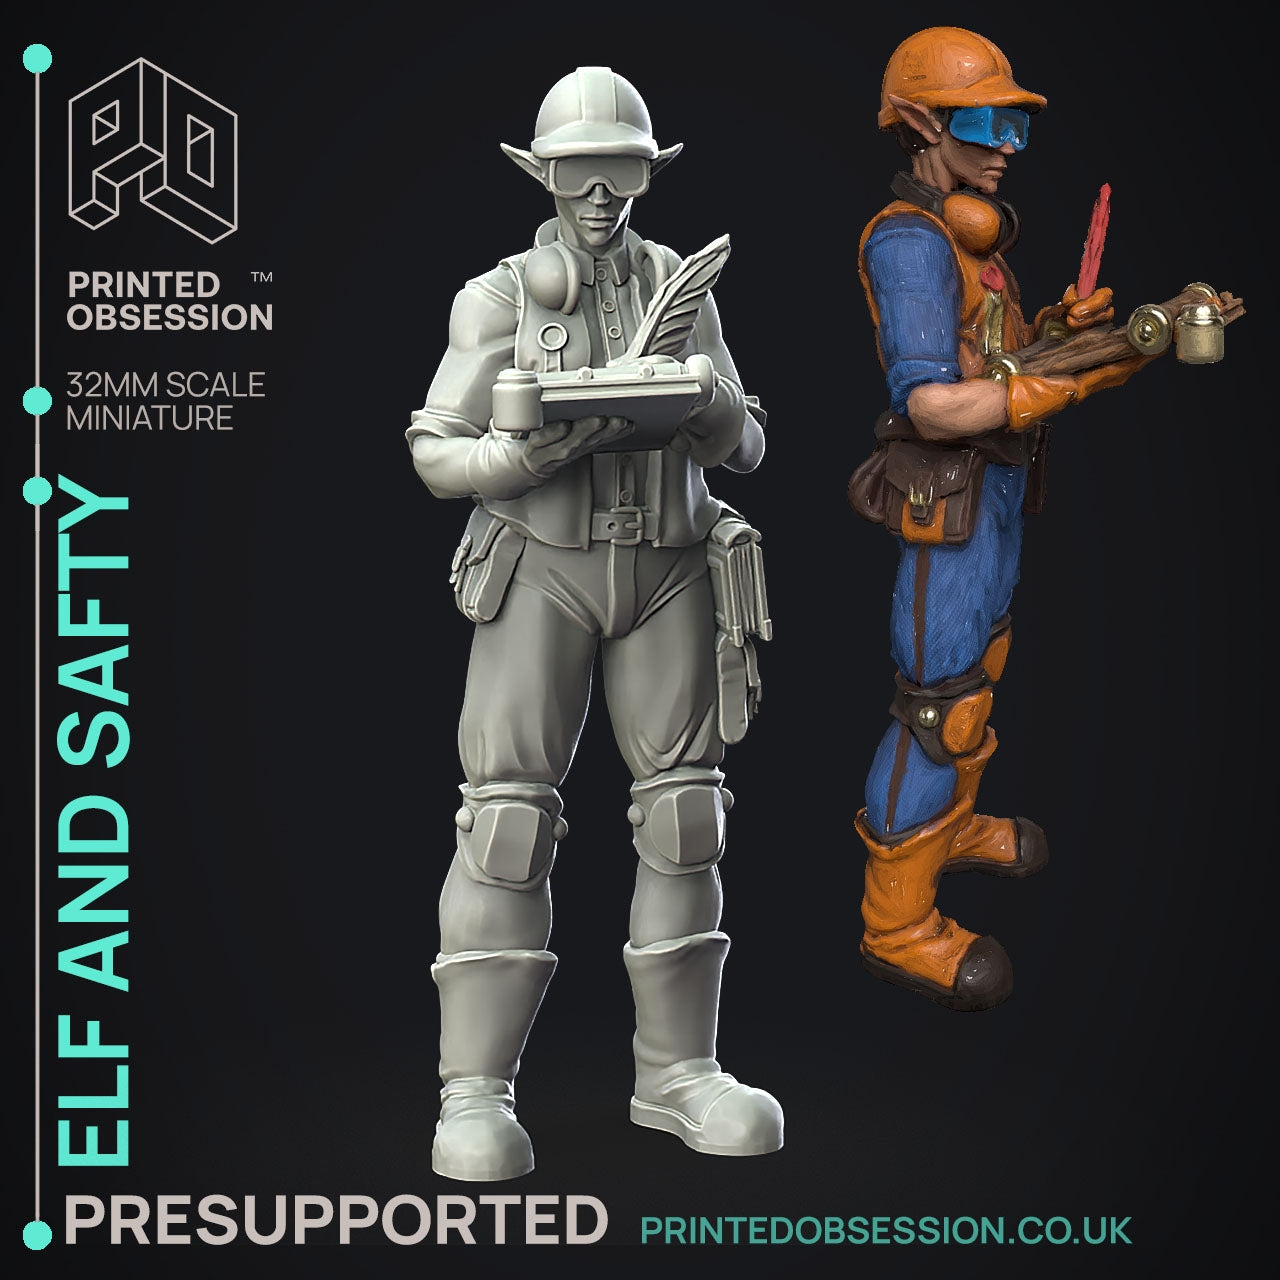 Elf and Safty Dungeon Cleaning Inc. - The Printed Obsession - Table-top mini, 3D Printed Collectable for painting and playing!